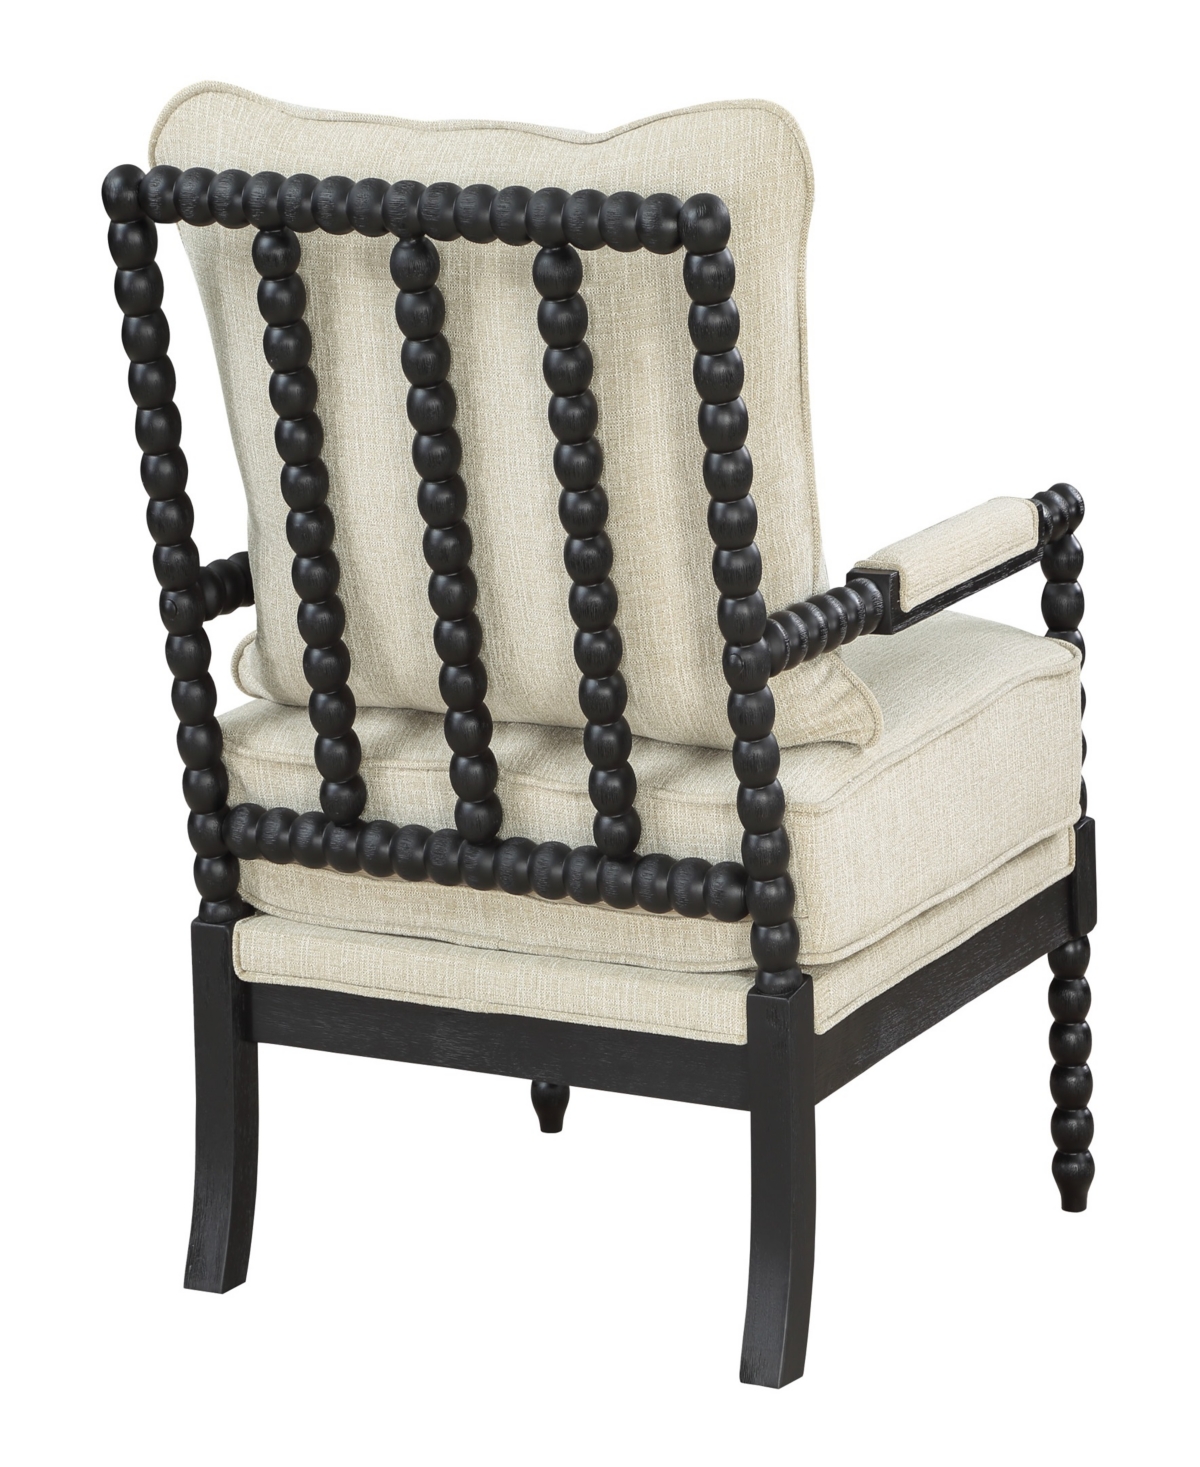 Shop Osp Home Furnishings Office Star Eliza Brown Spindle Chair With Linen Fabric